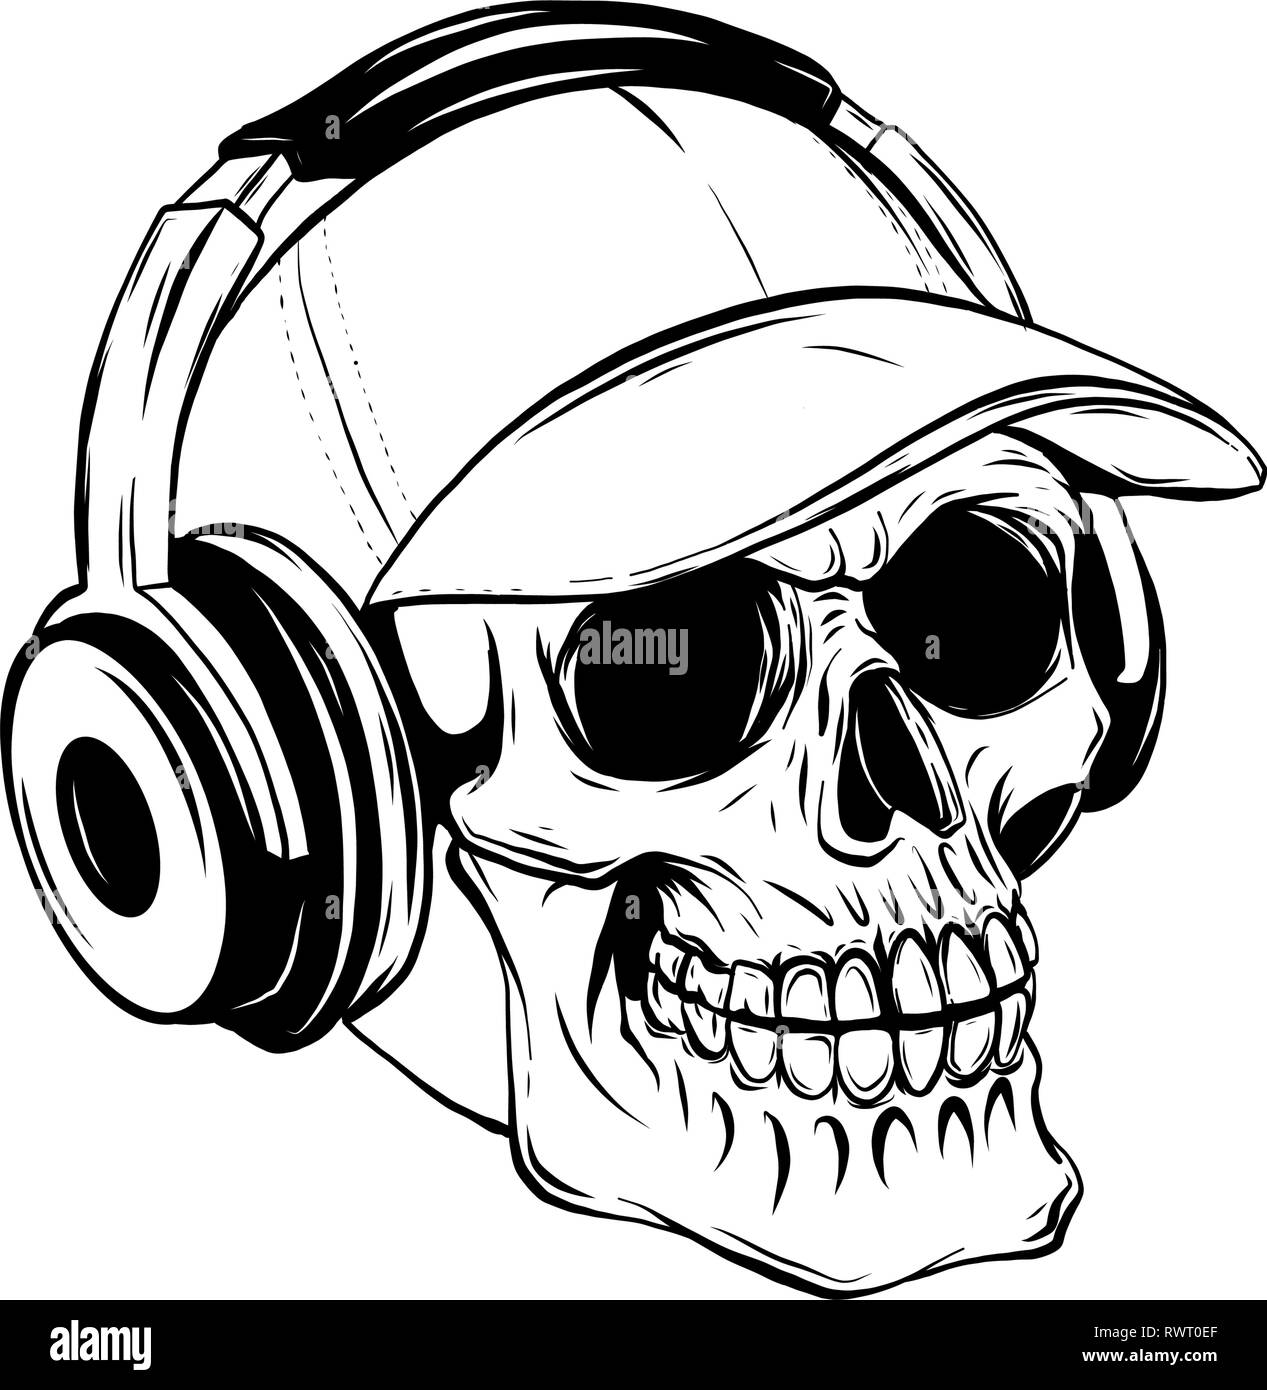 skull with headphones listening to music drawing Stock Vector